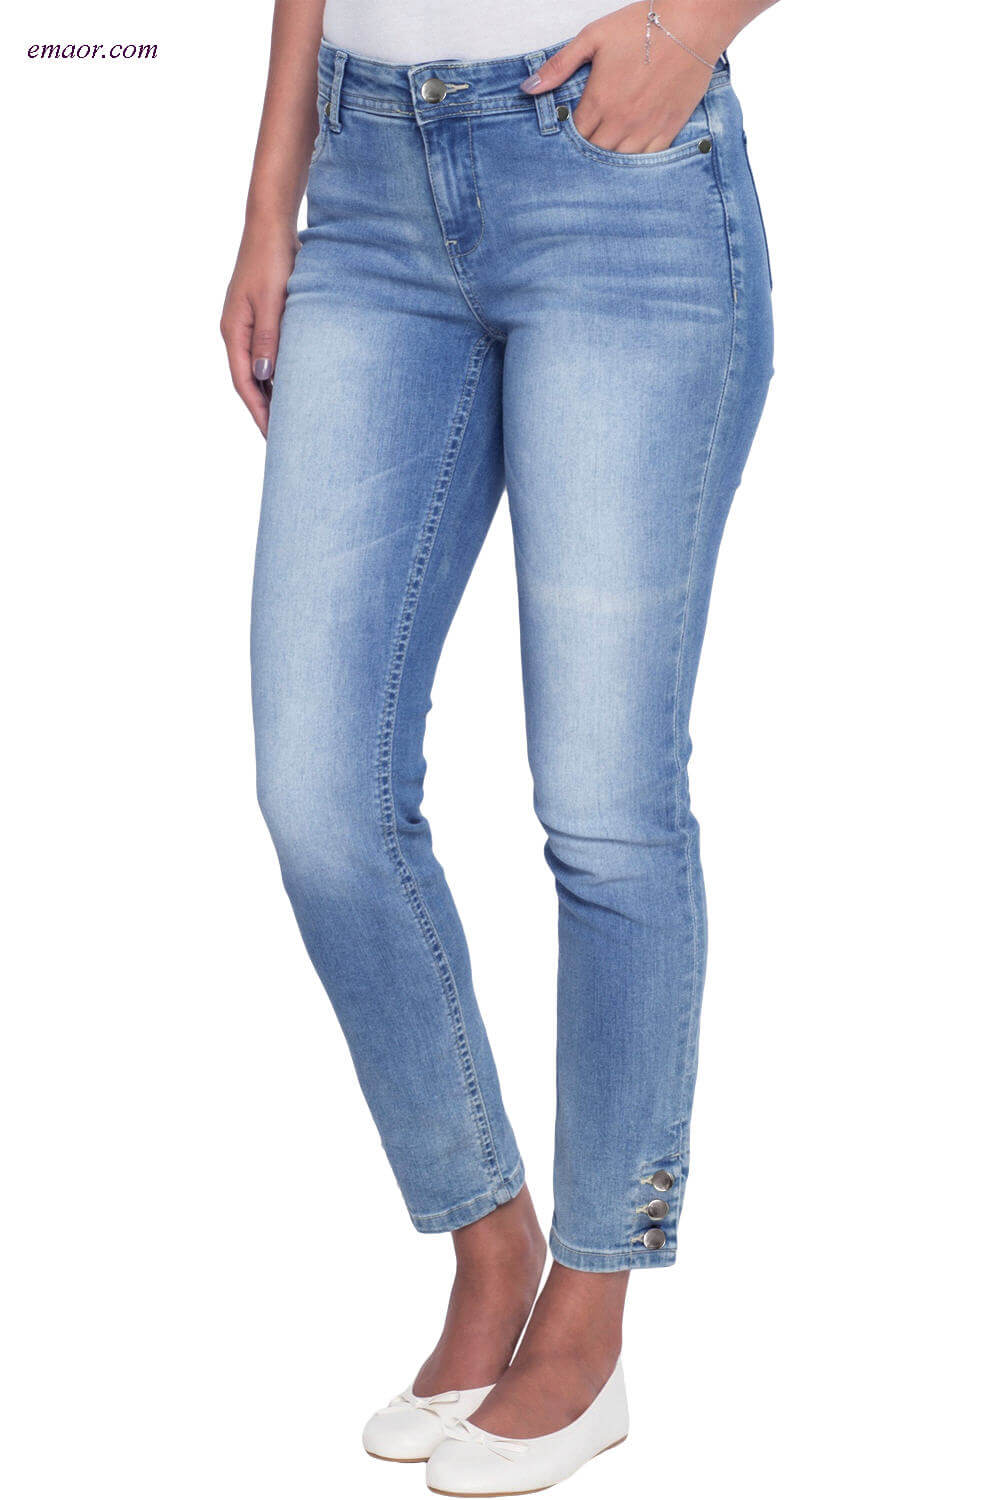 Wholesale Button Detail Wash Skinny Affordable Jeans on Sale